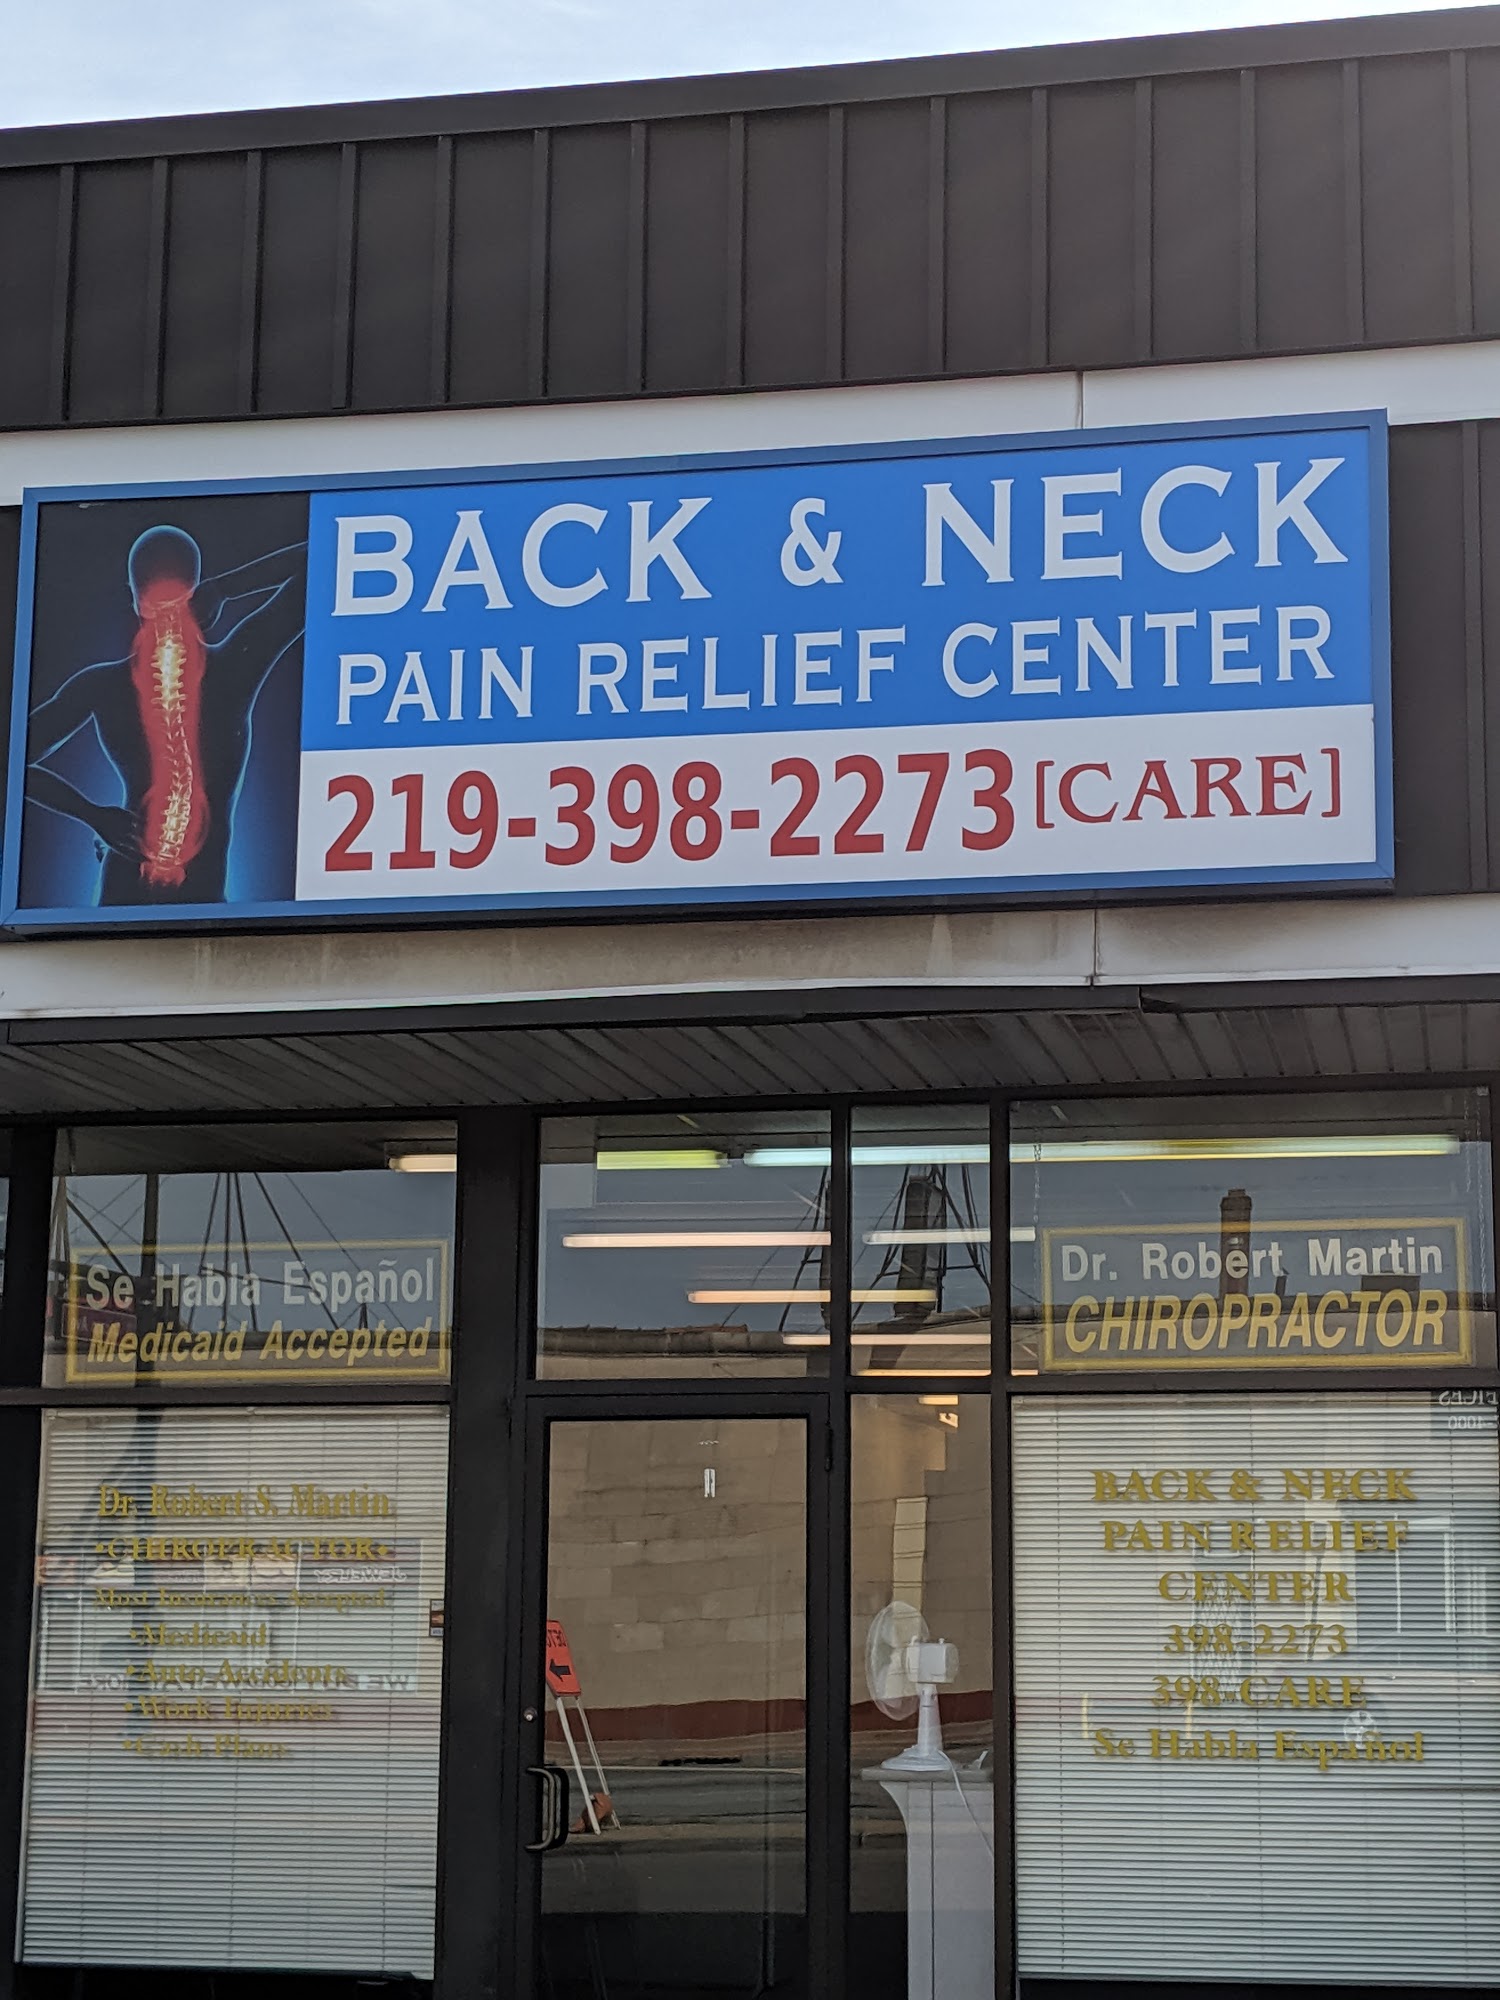 Back & Neck Pain Relief Center 4705 Indianapolis Blvd # C, East Chicago Indiana 46312